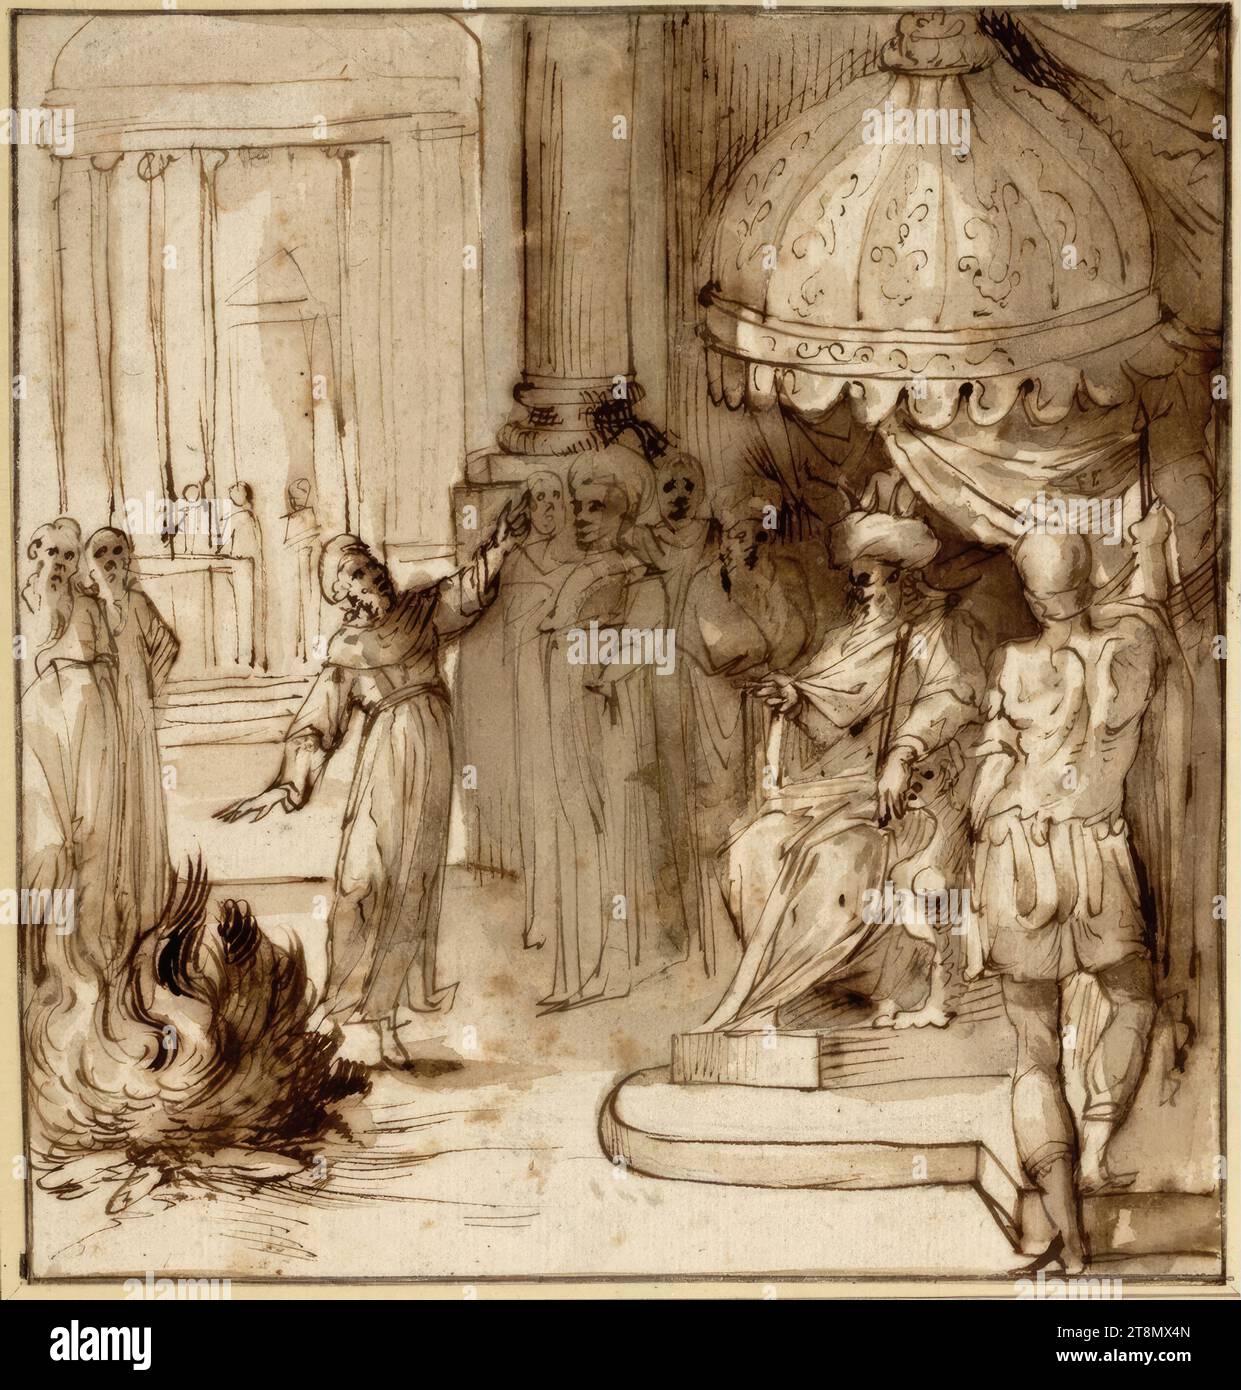 Saint Francis challenges the ruler to put his hand in the fire and prove the truth of the Christian faith, Domenico Cresti gen. Passignano (Badia a Passignano (Tavarnelle Val di Pesa) 1559 - 1638 Florence), drawing, pen, ink, washed, 16.0 x 16.0 cm, l.l. Duke Albert of Saxe-Teschen Stock Photo